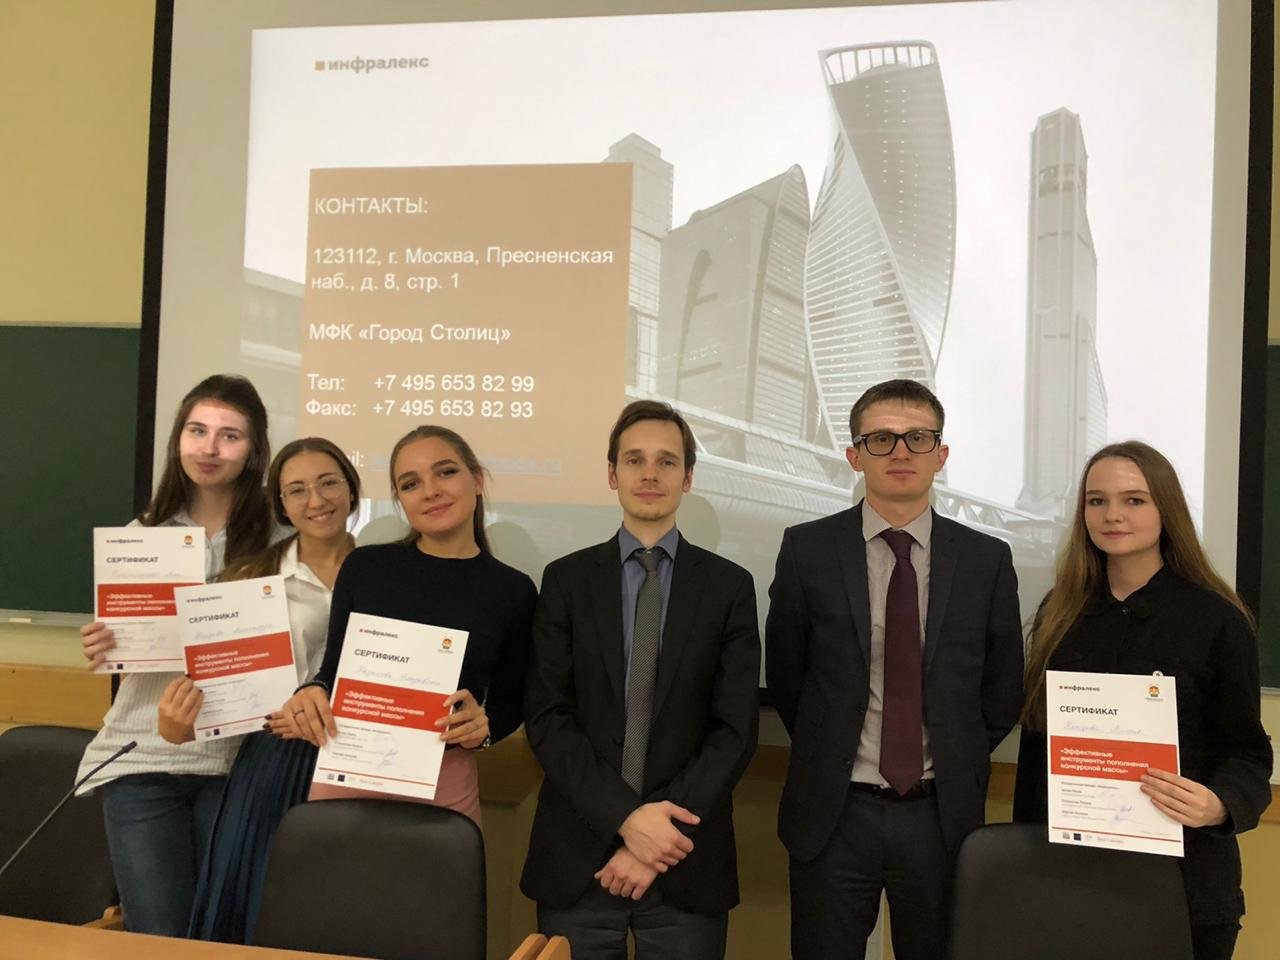 The Infralex course at the School of Masters of the Faculty of Law of Lomonosov Moscow State University has been successfully completed